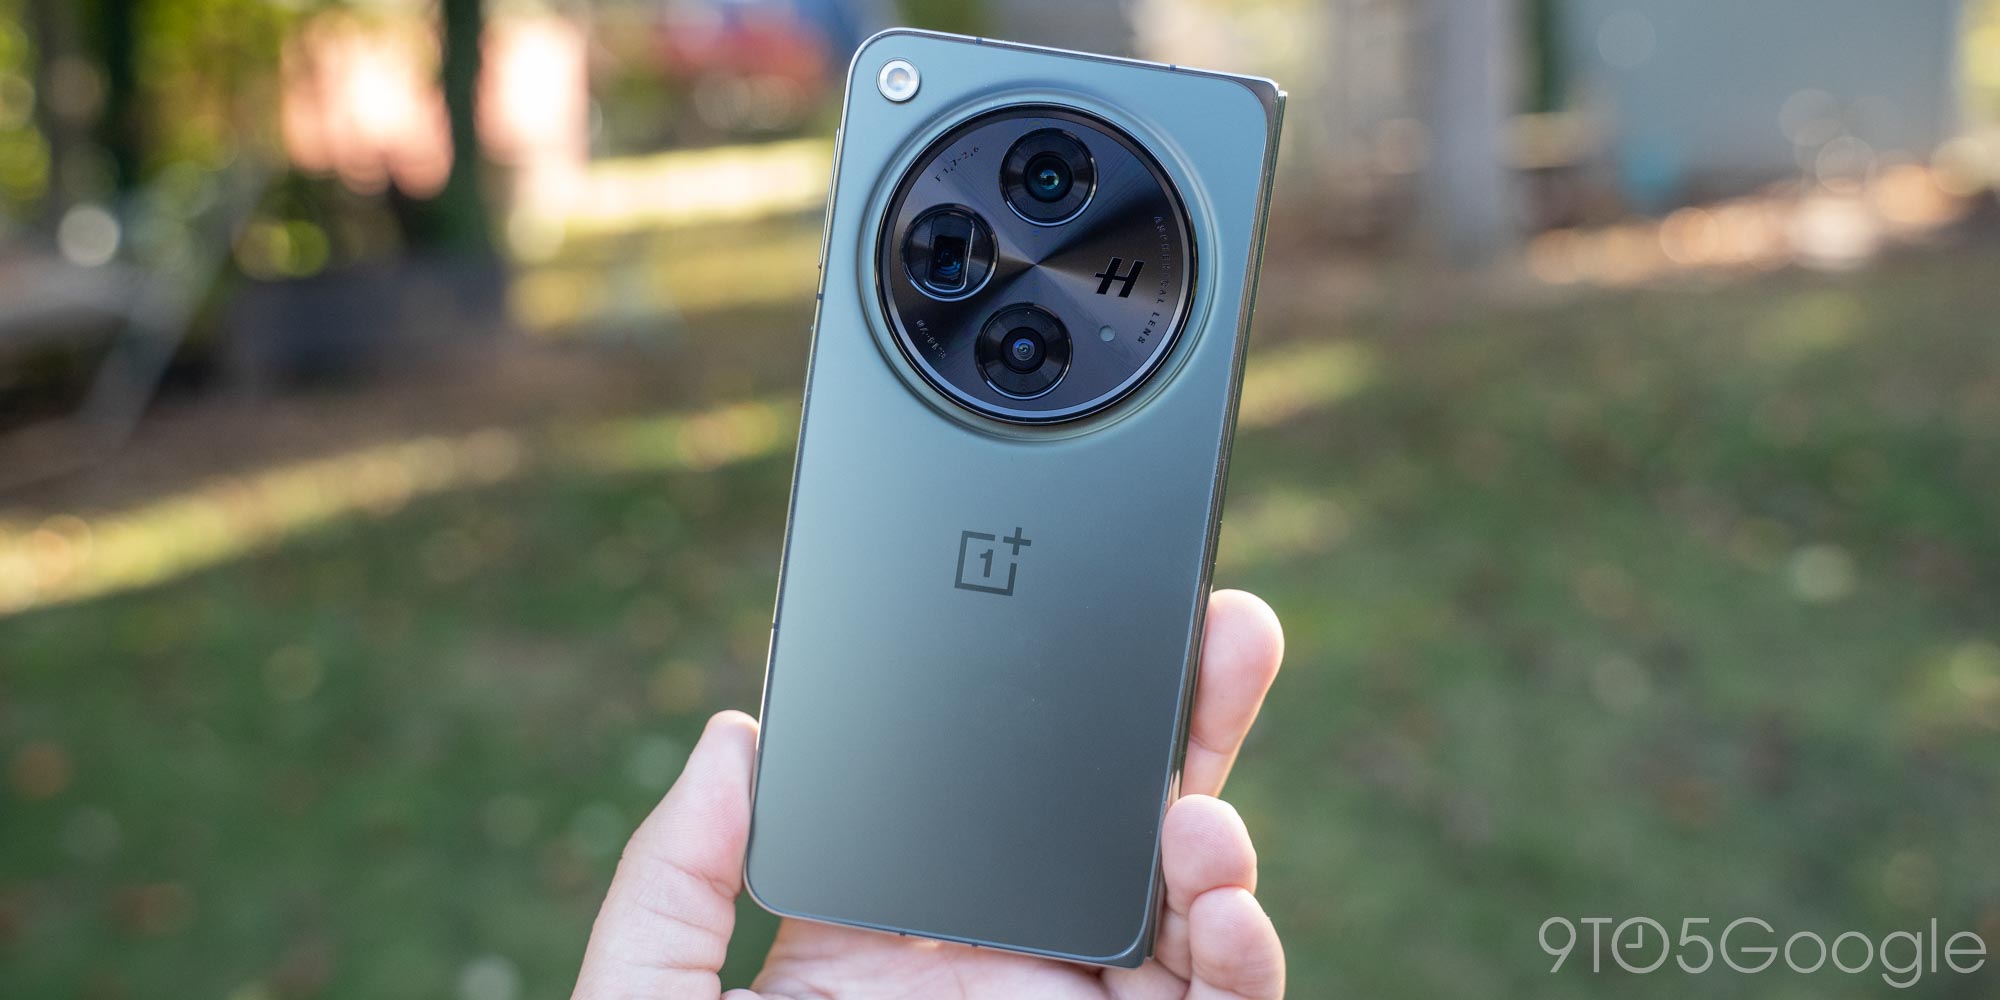 Device Trade-in: Is this a limited time deal or the normal one? : r/oneplus